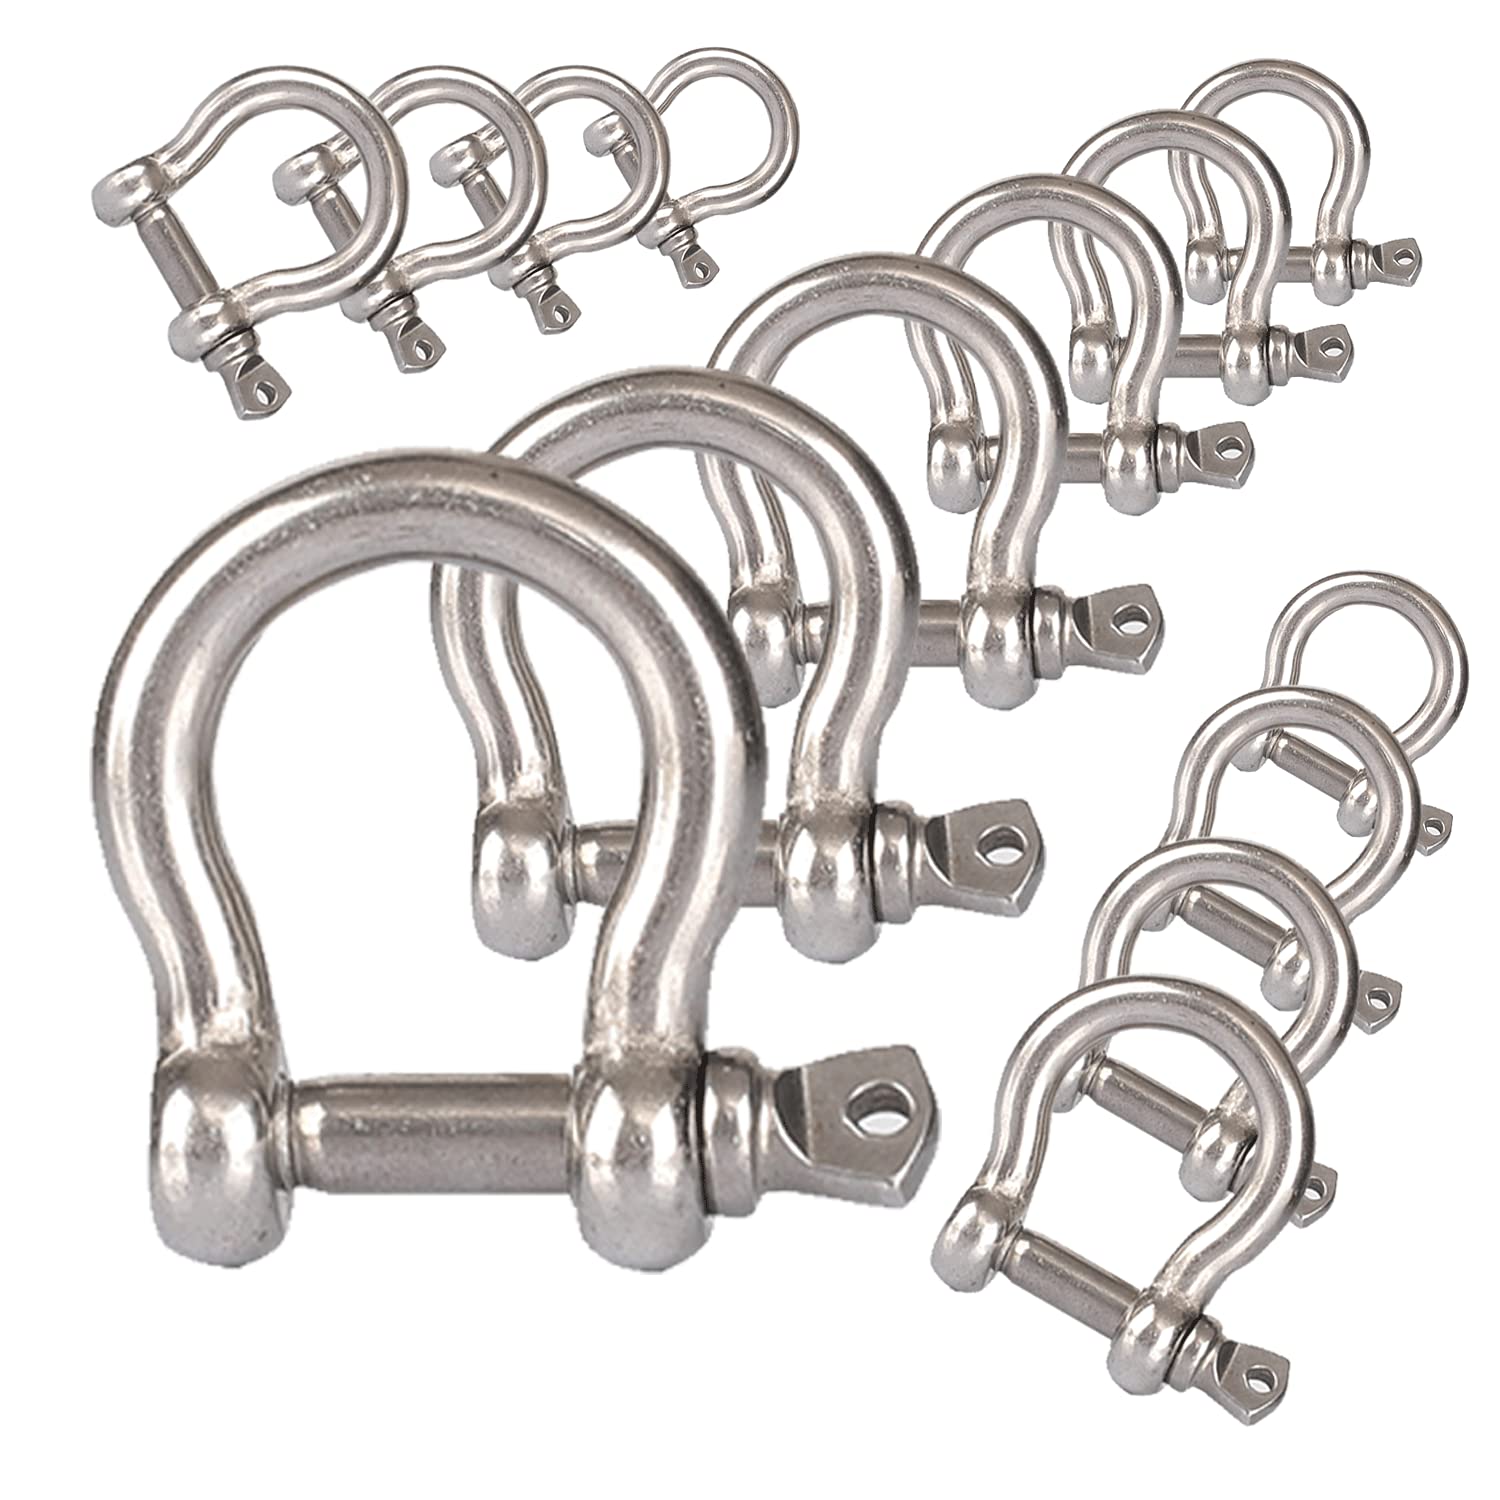 20PCS 1/4 Inch Screw Pin Anchor Shackle,M6 Heavy Duty Stainless Steel Chain  Shackle for